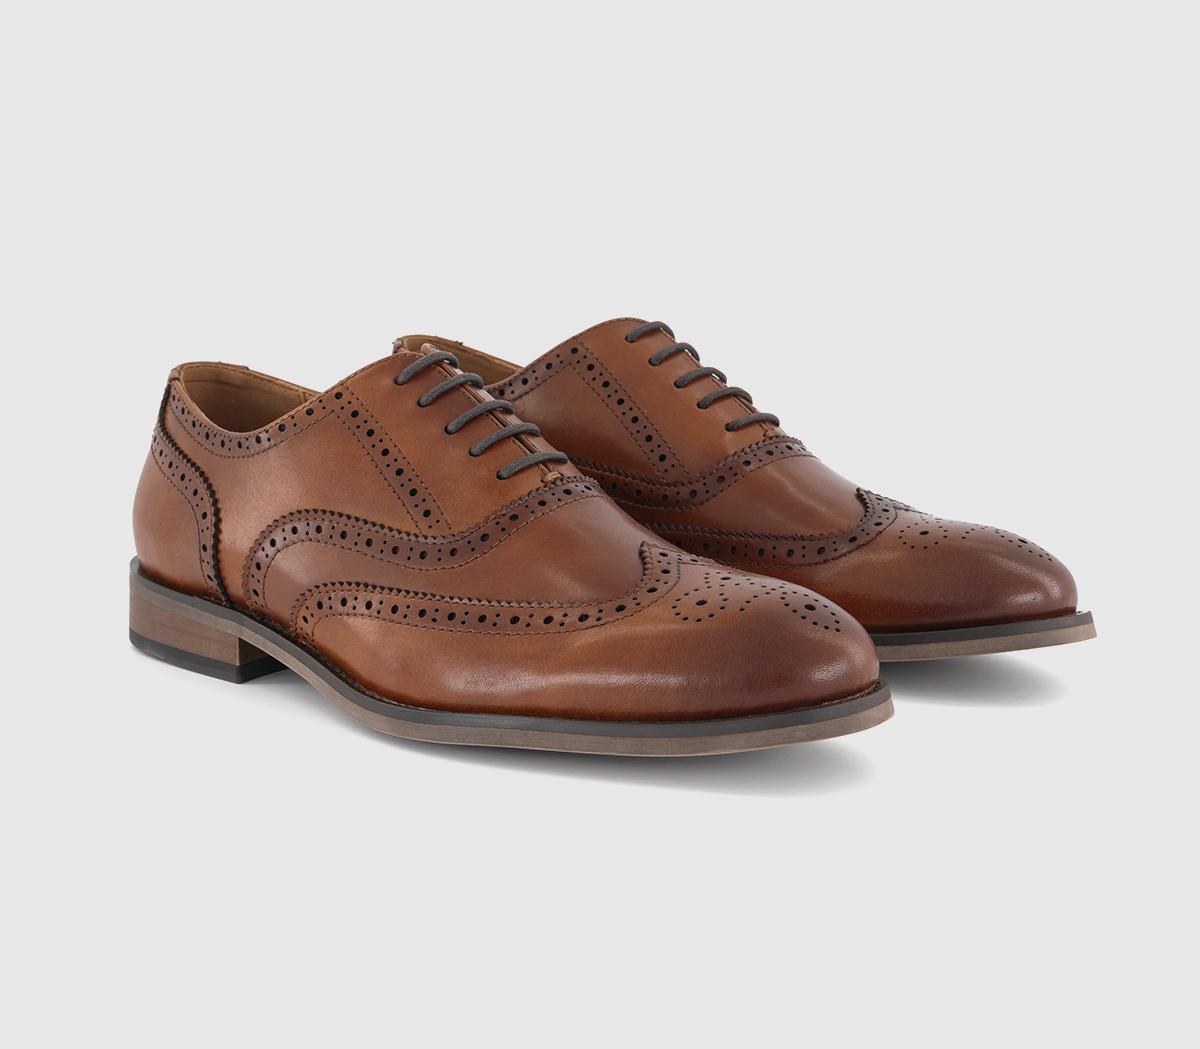 OFFICE Mens Milton Oxford Brogue Shoes Tan Leather, 10